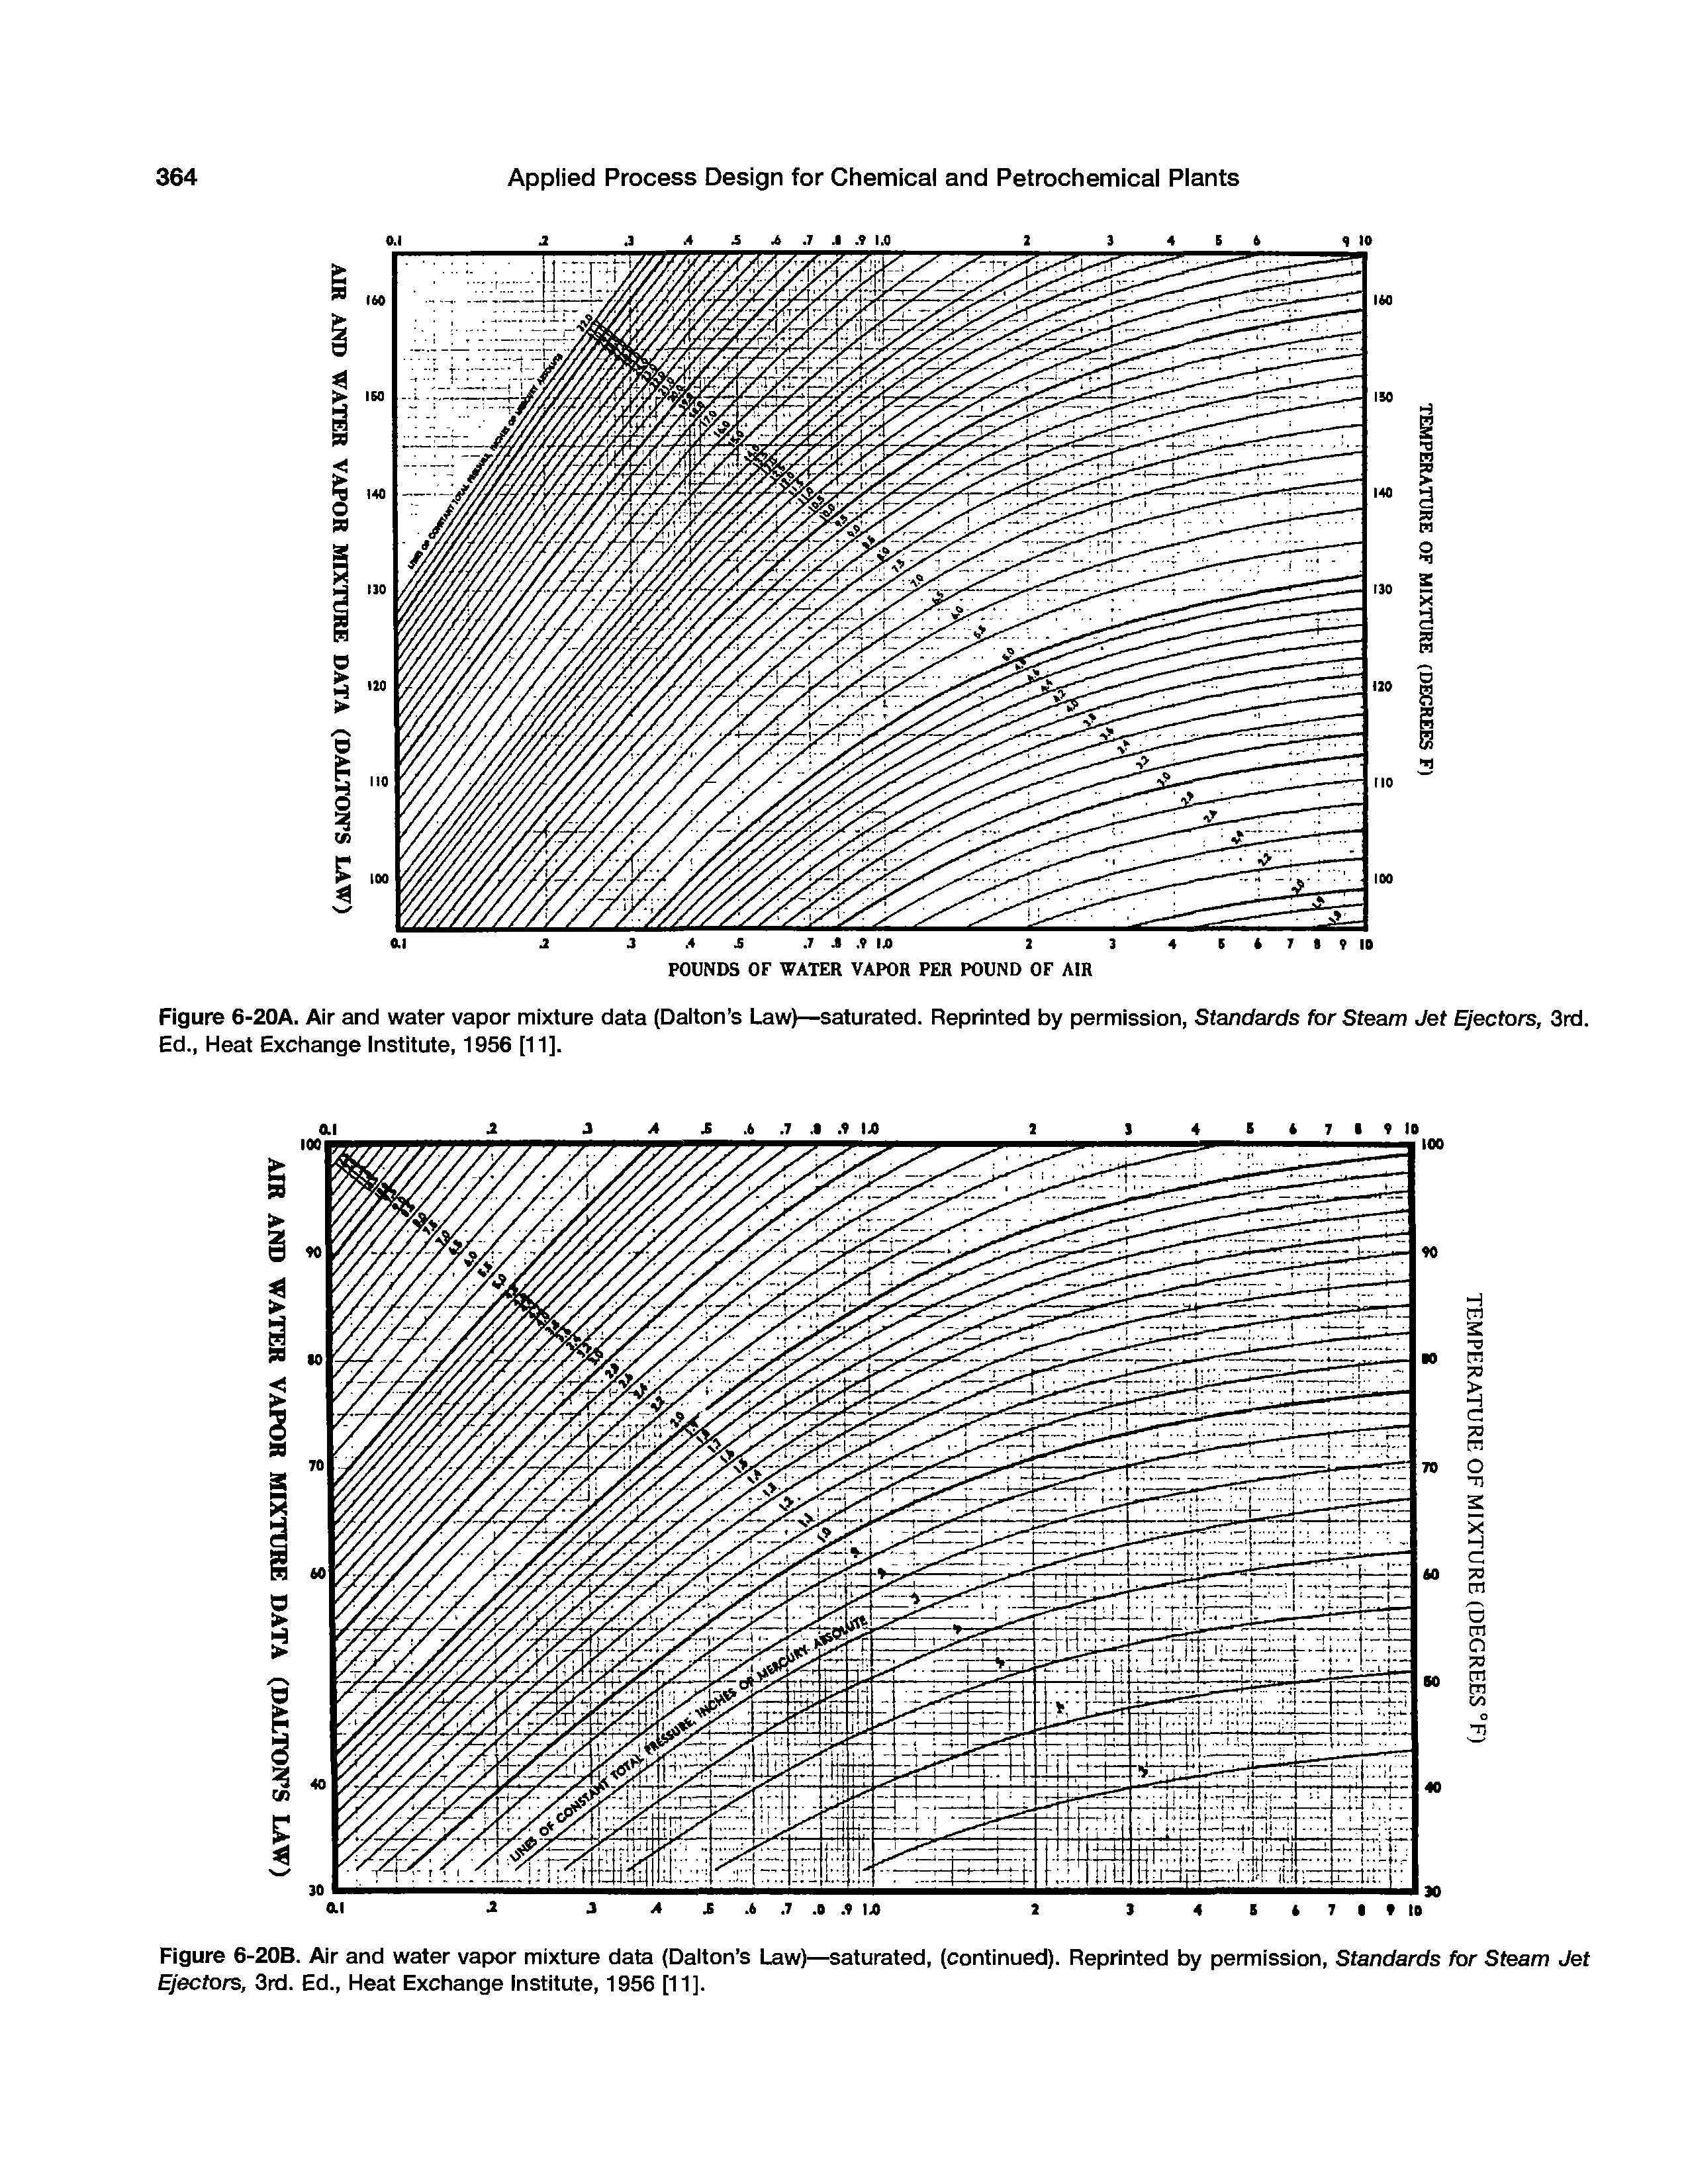 Figure 6-20A. Air and water vapor mixture data (Dalton s Law)—saturated. Reprinted by permission, Standards for Steam Jet EjectorSj 3rd. Ed., Heat Exchange Institute, 1956 [11].